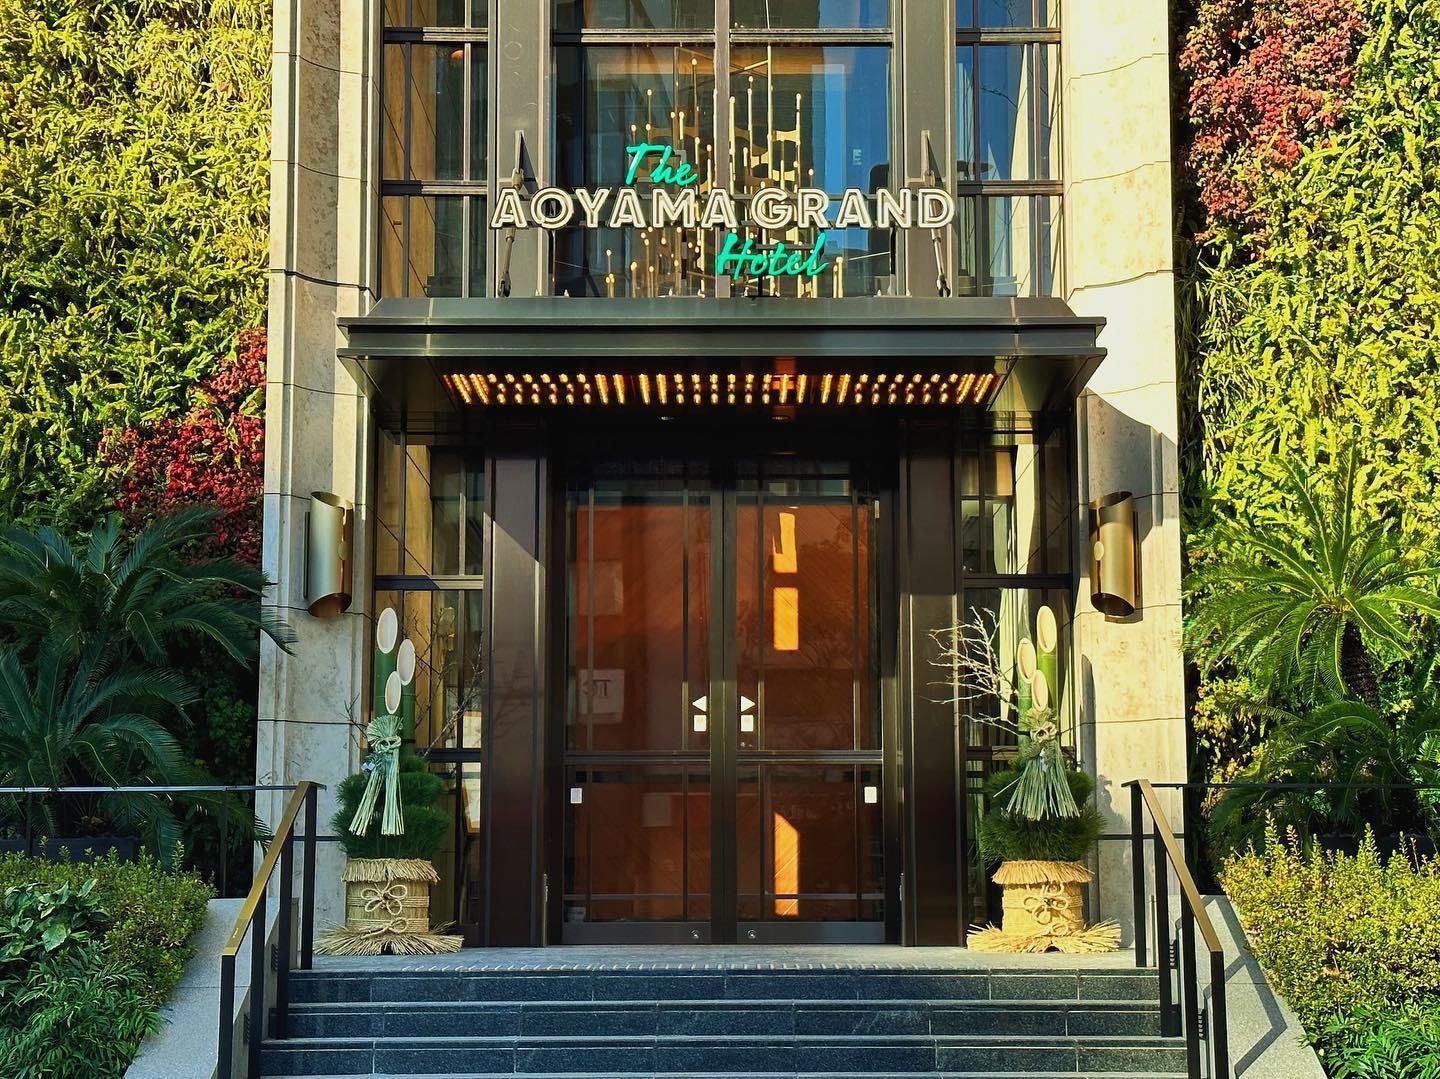 Images THE AOYAMA GRAND HOTEL